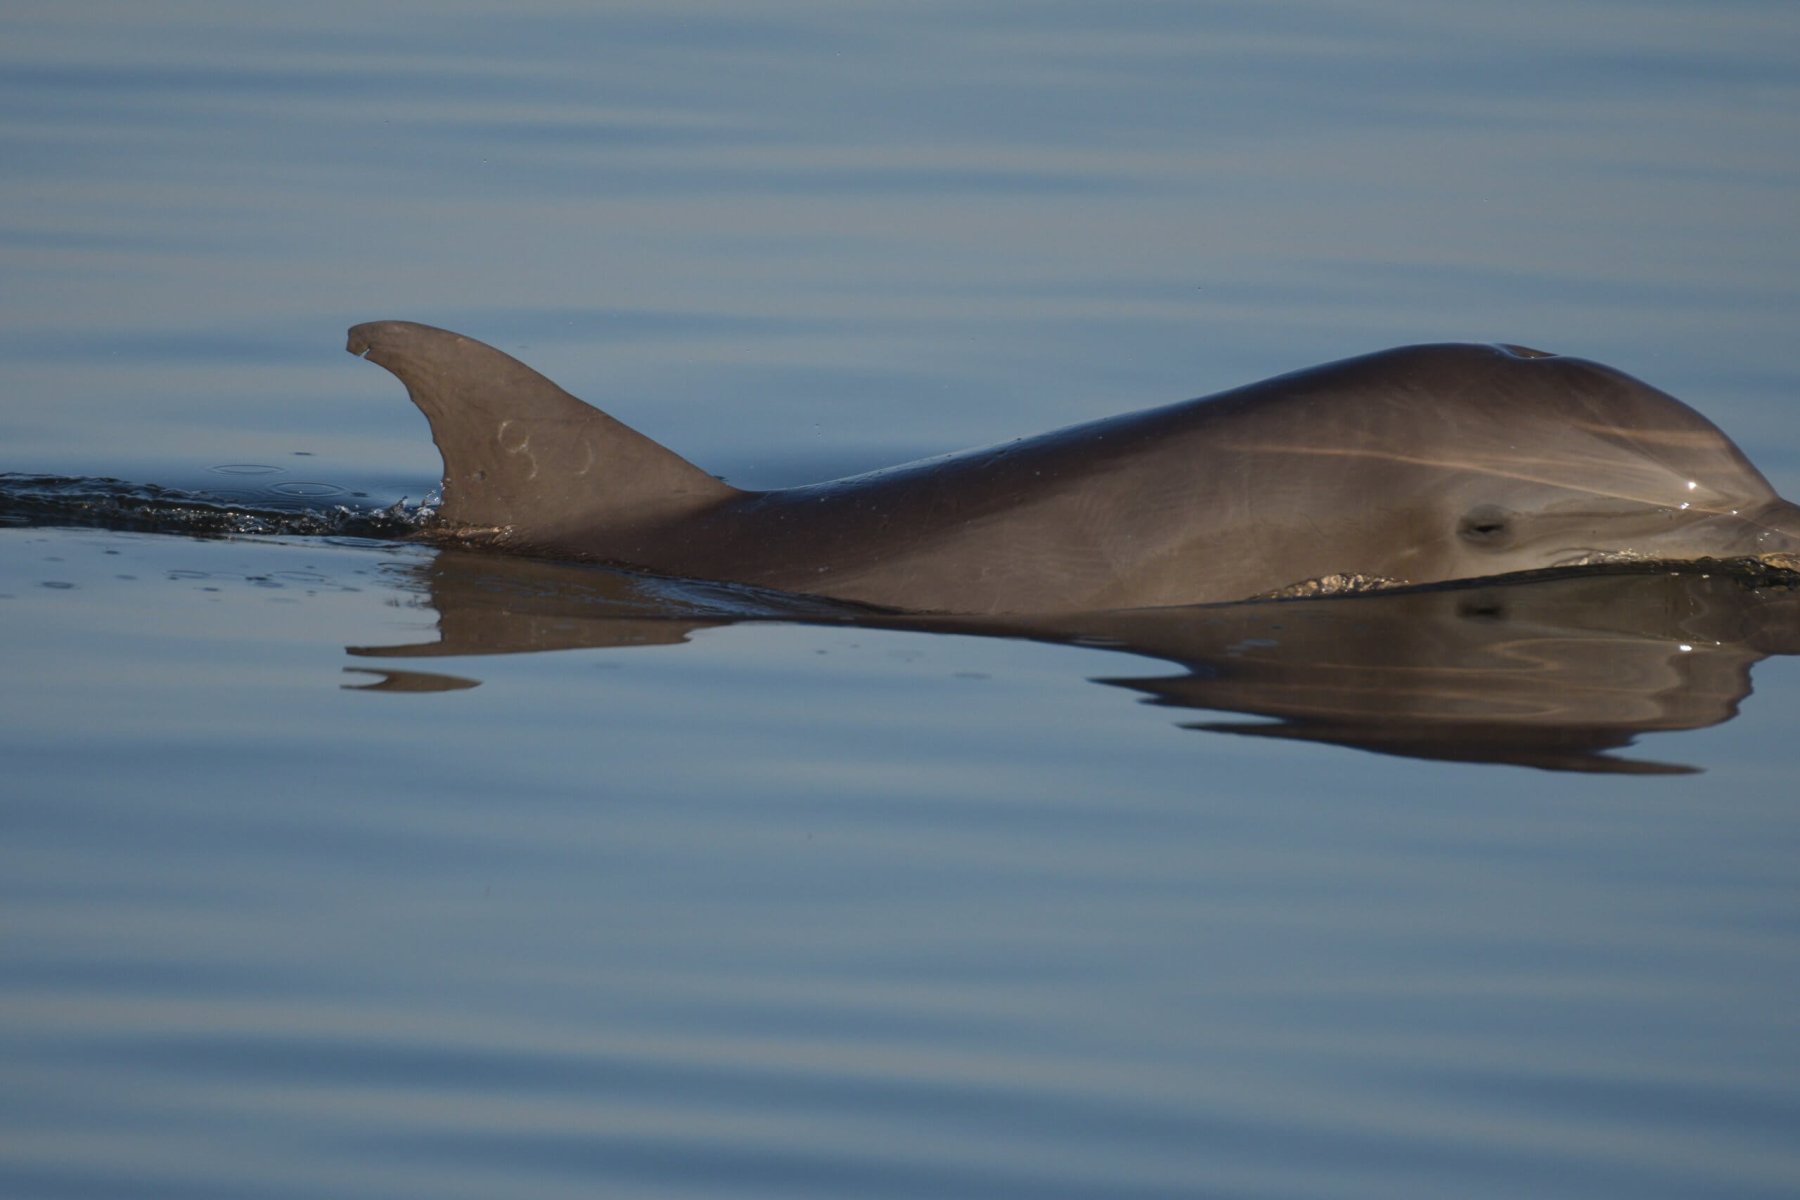 A single Barataria Bay bottlenose dolphin from dorsal fin to rostrum